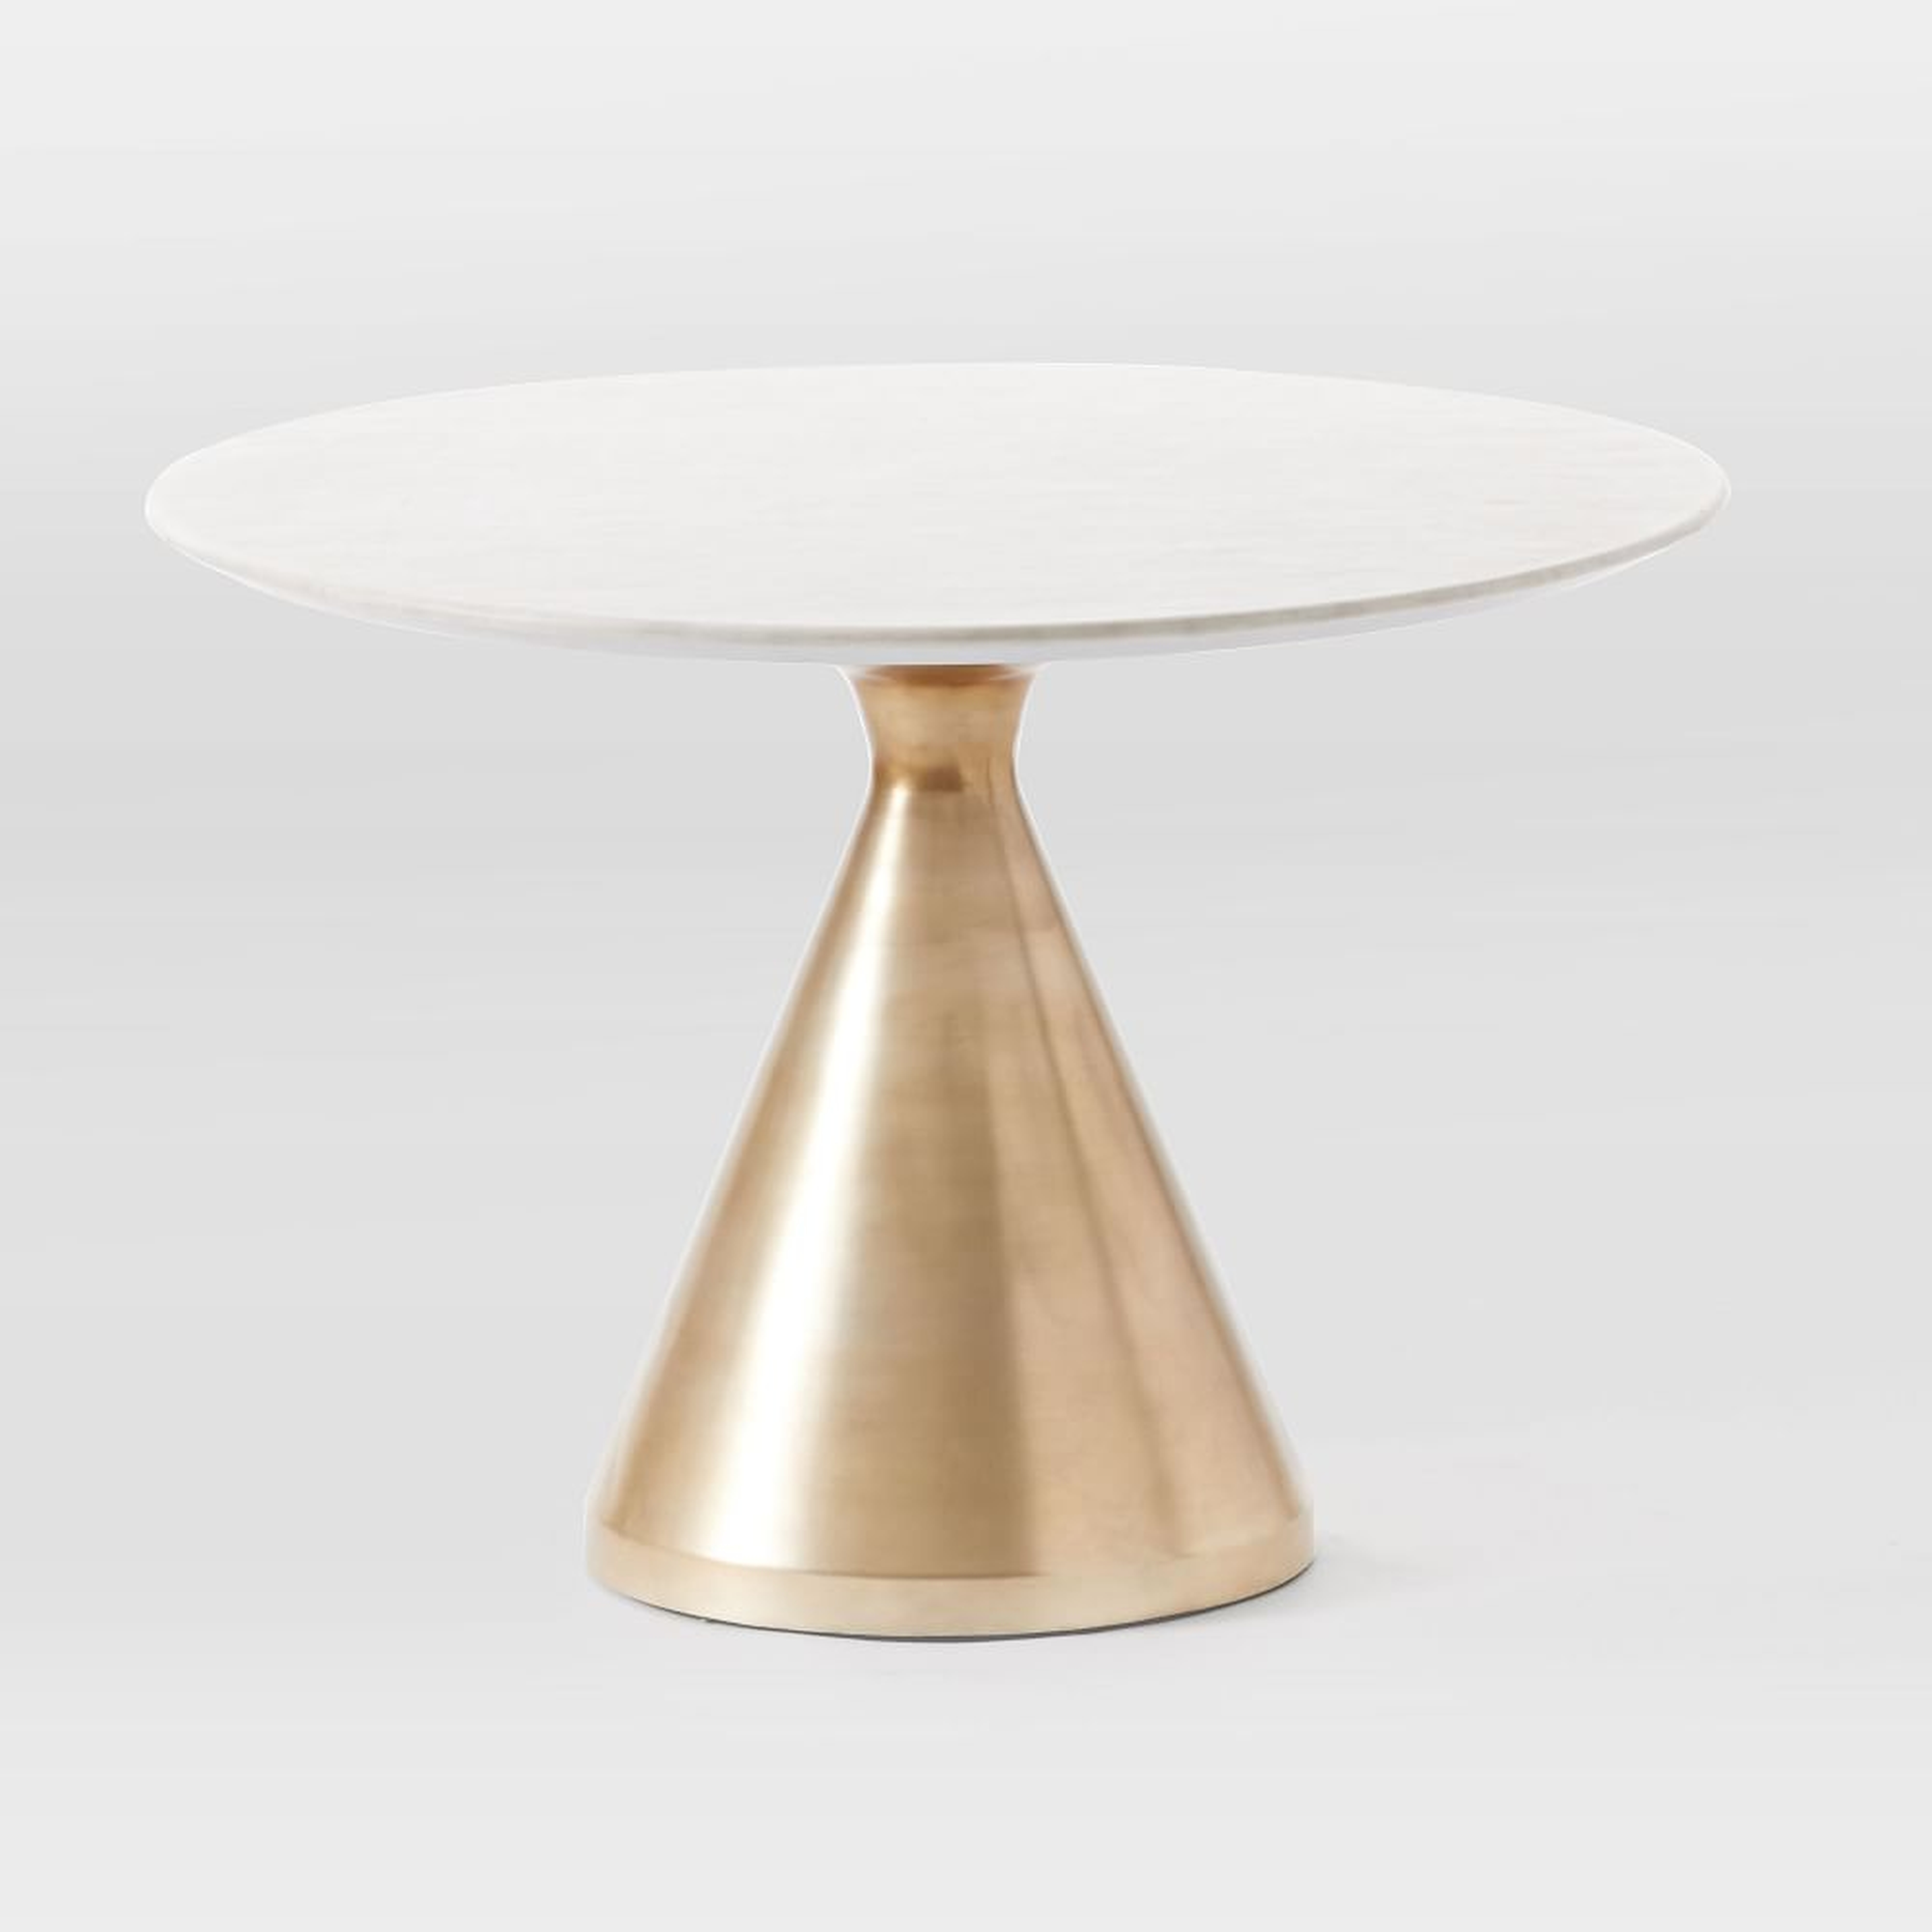 Silhouette 44" Round Pedestal Dining Table, White Marble, Antique Brass - West Elm